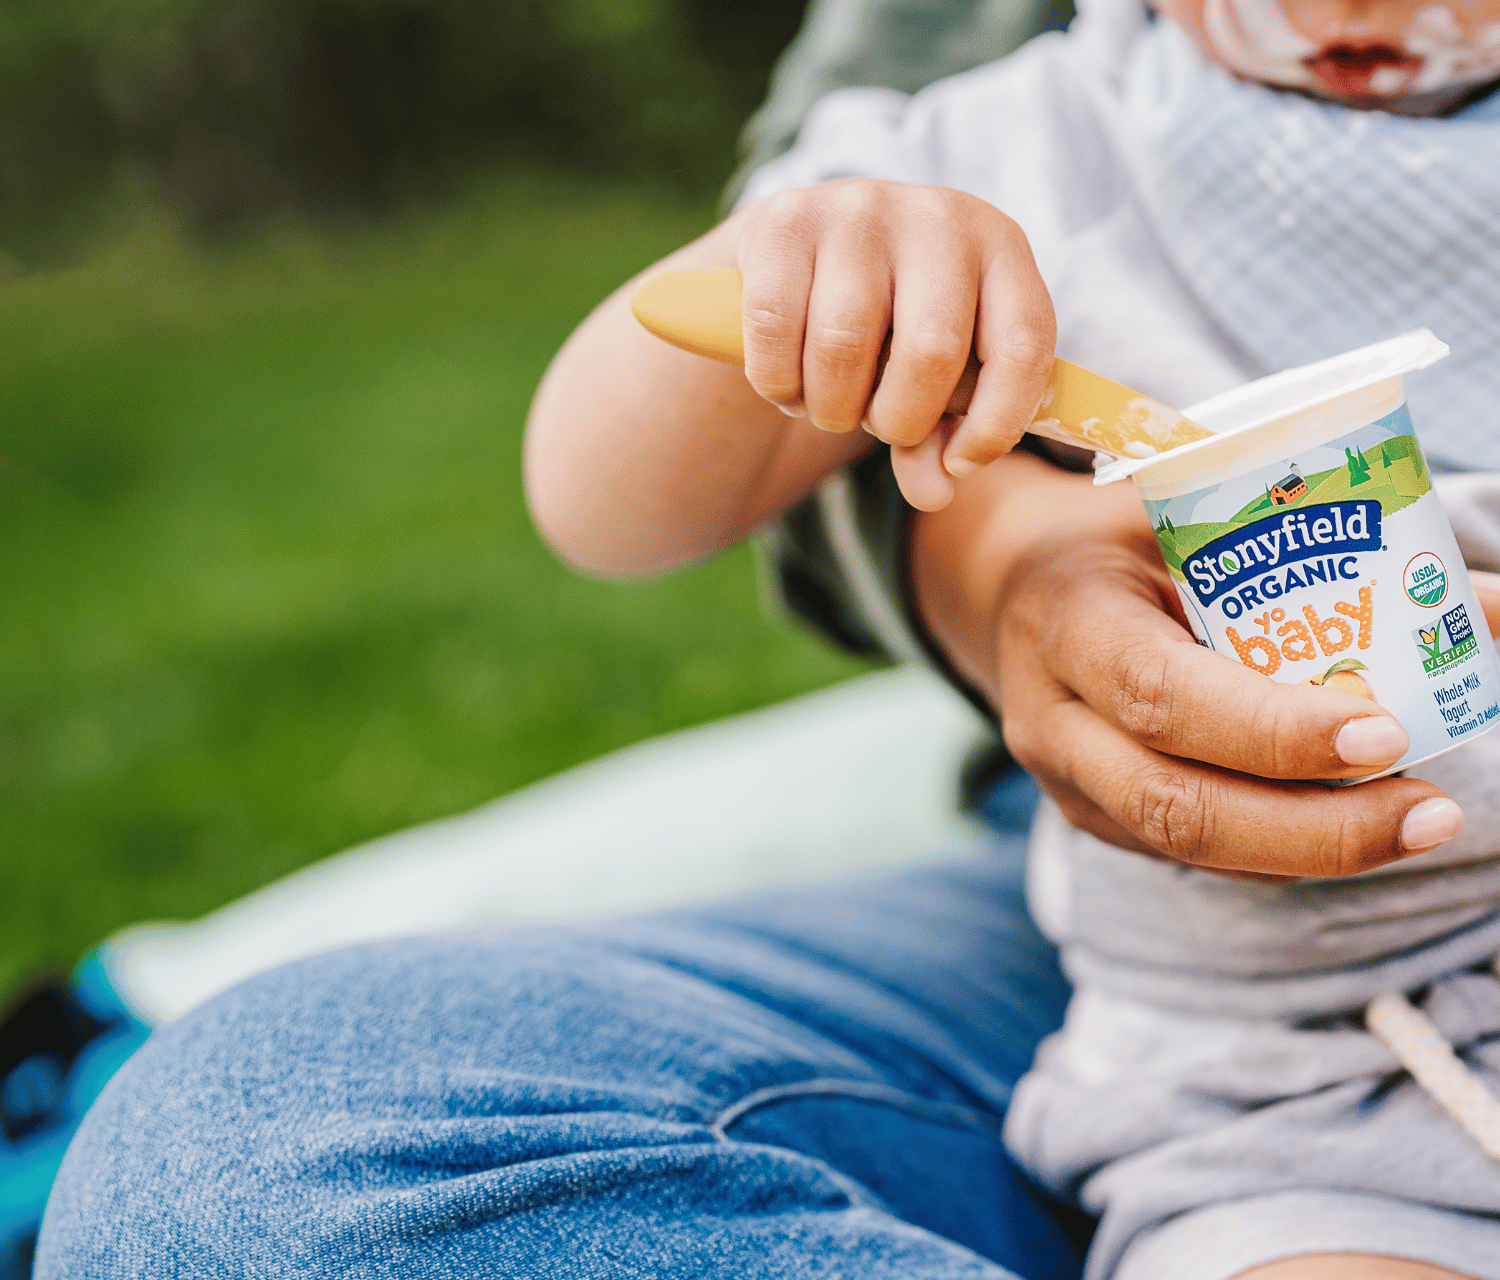 Danone gains 'different perspective' in baby food with Yooji tie-up